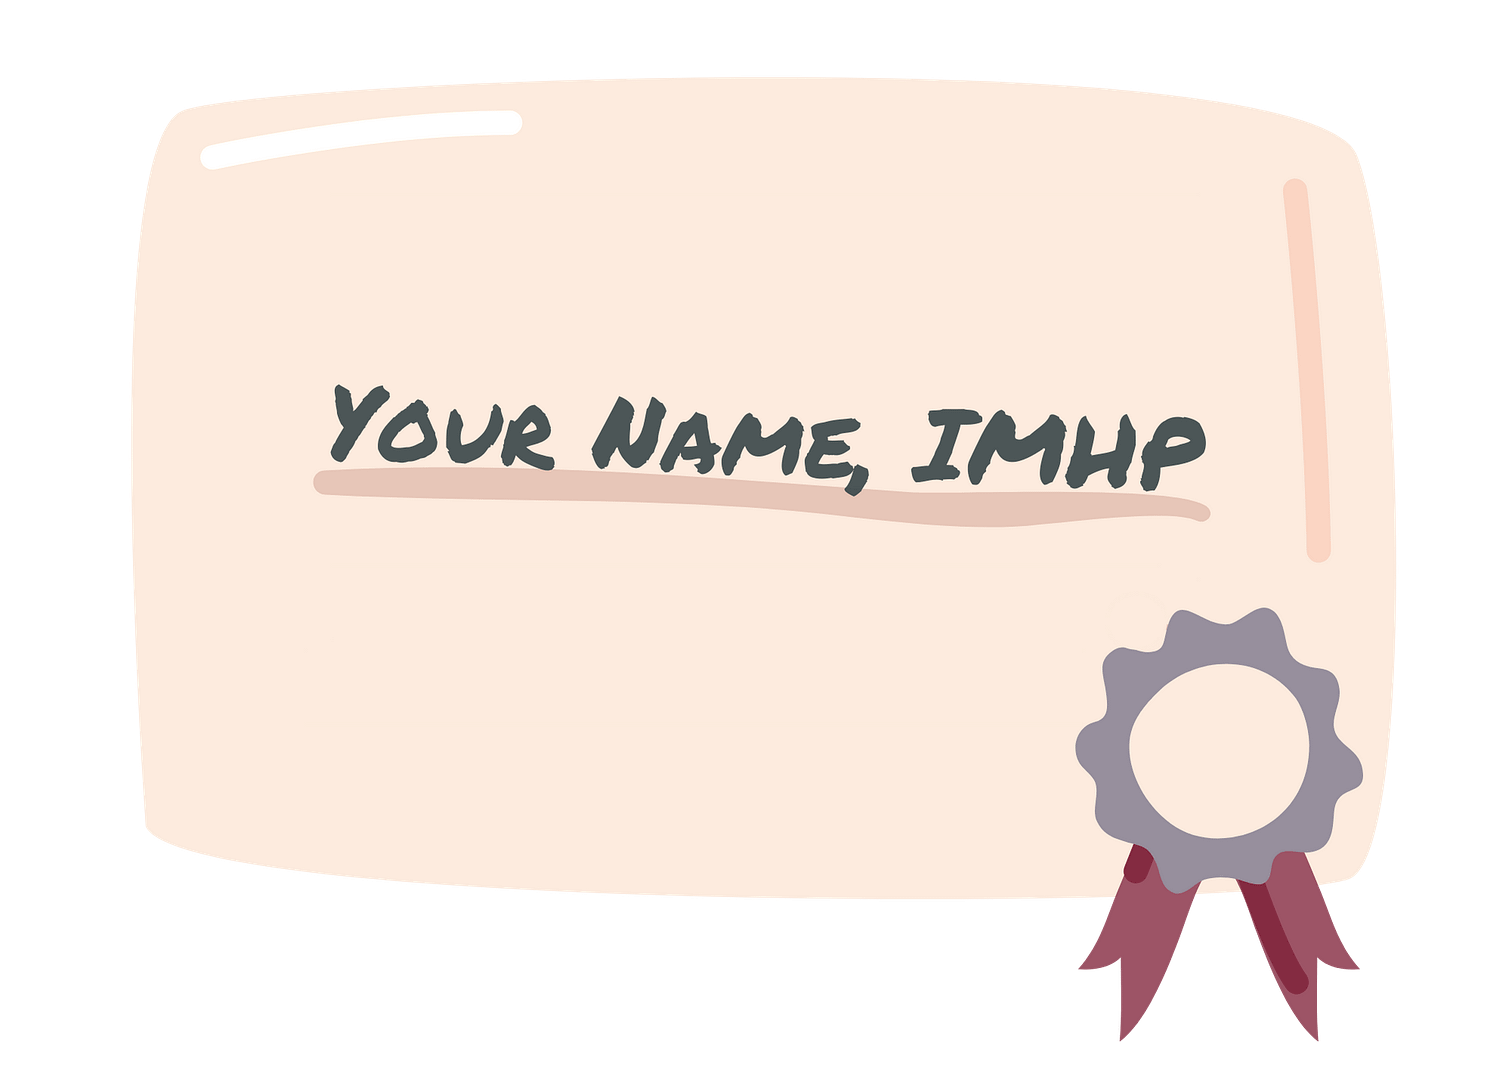 Your Name, IMHP